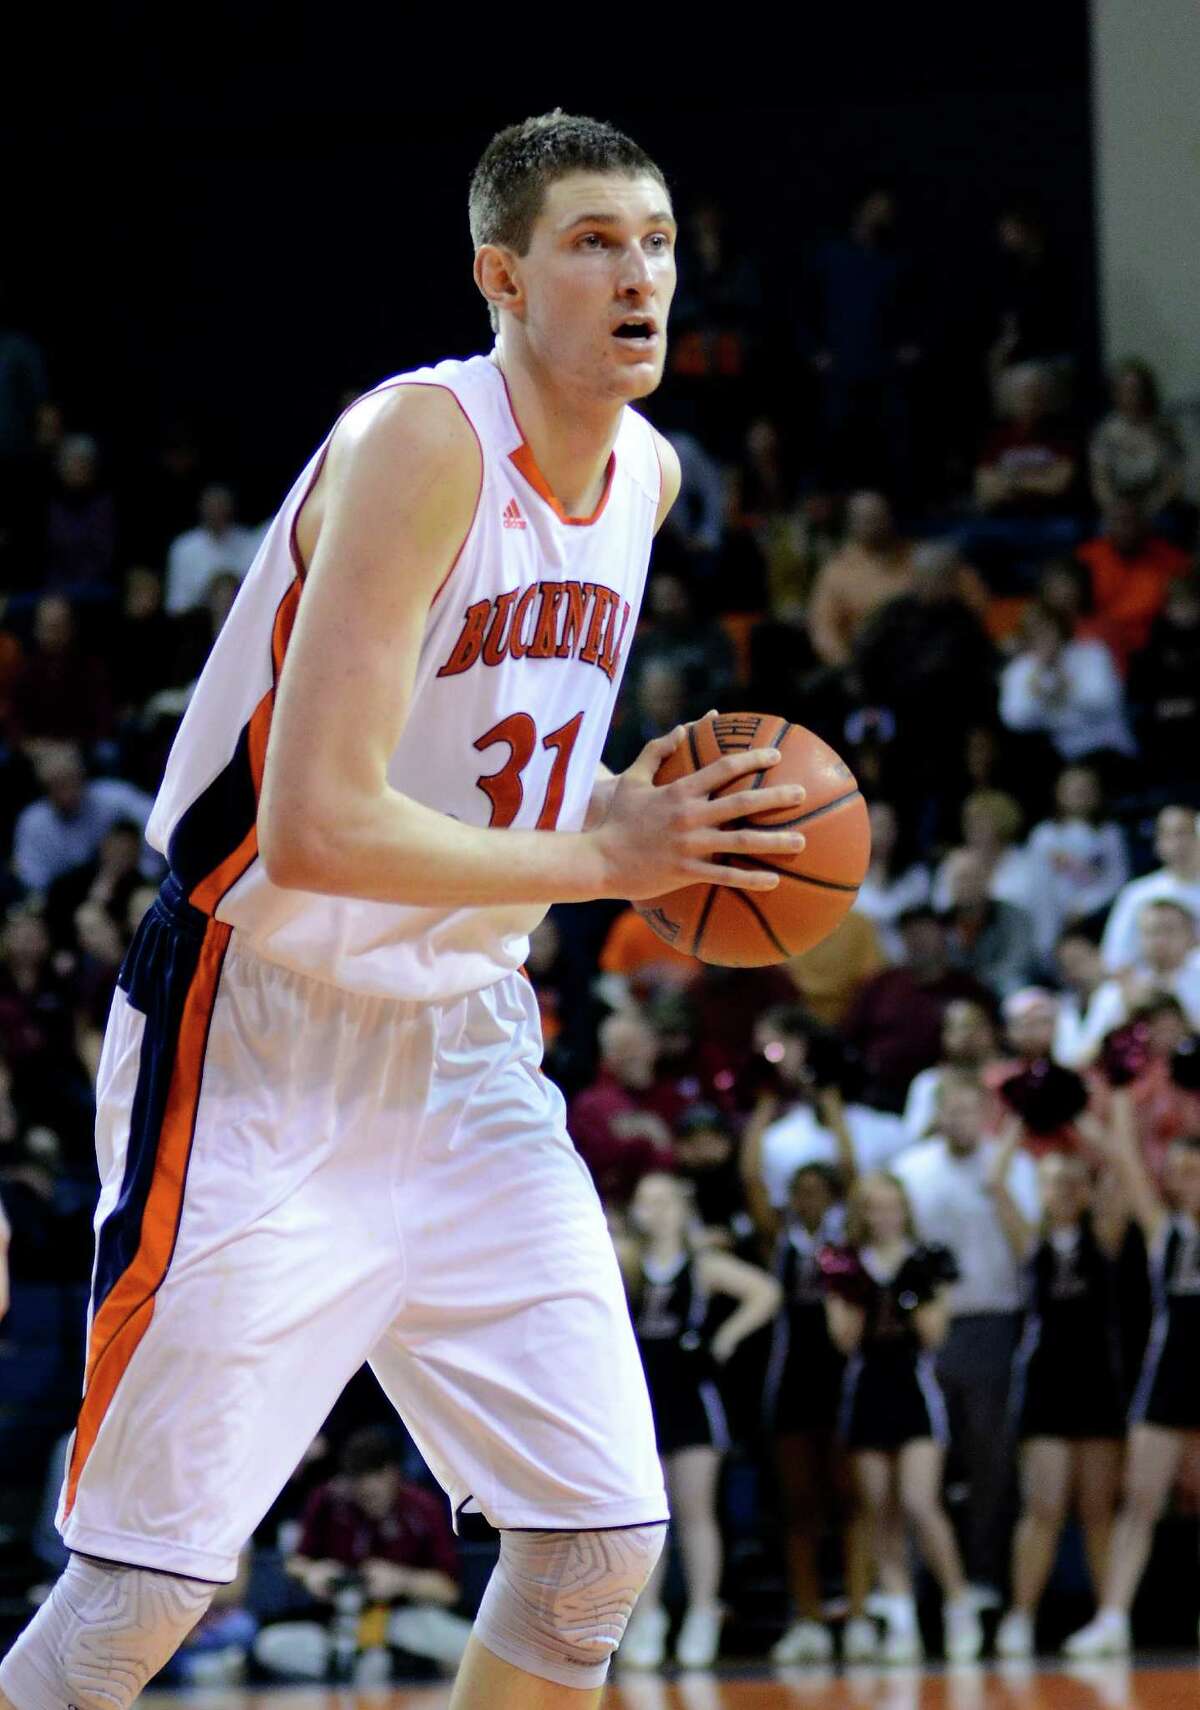 Bucknell's Mike Muscala looks to pass during the second half against Lafayette in an NCAA college basketball game for the Patriot League men's tournament title, Wednesday, March 13, 2013, in Lewisburg, Pa. Bucknell won 64-56. (AP Photo/Ralph Wilson)